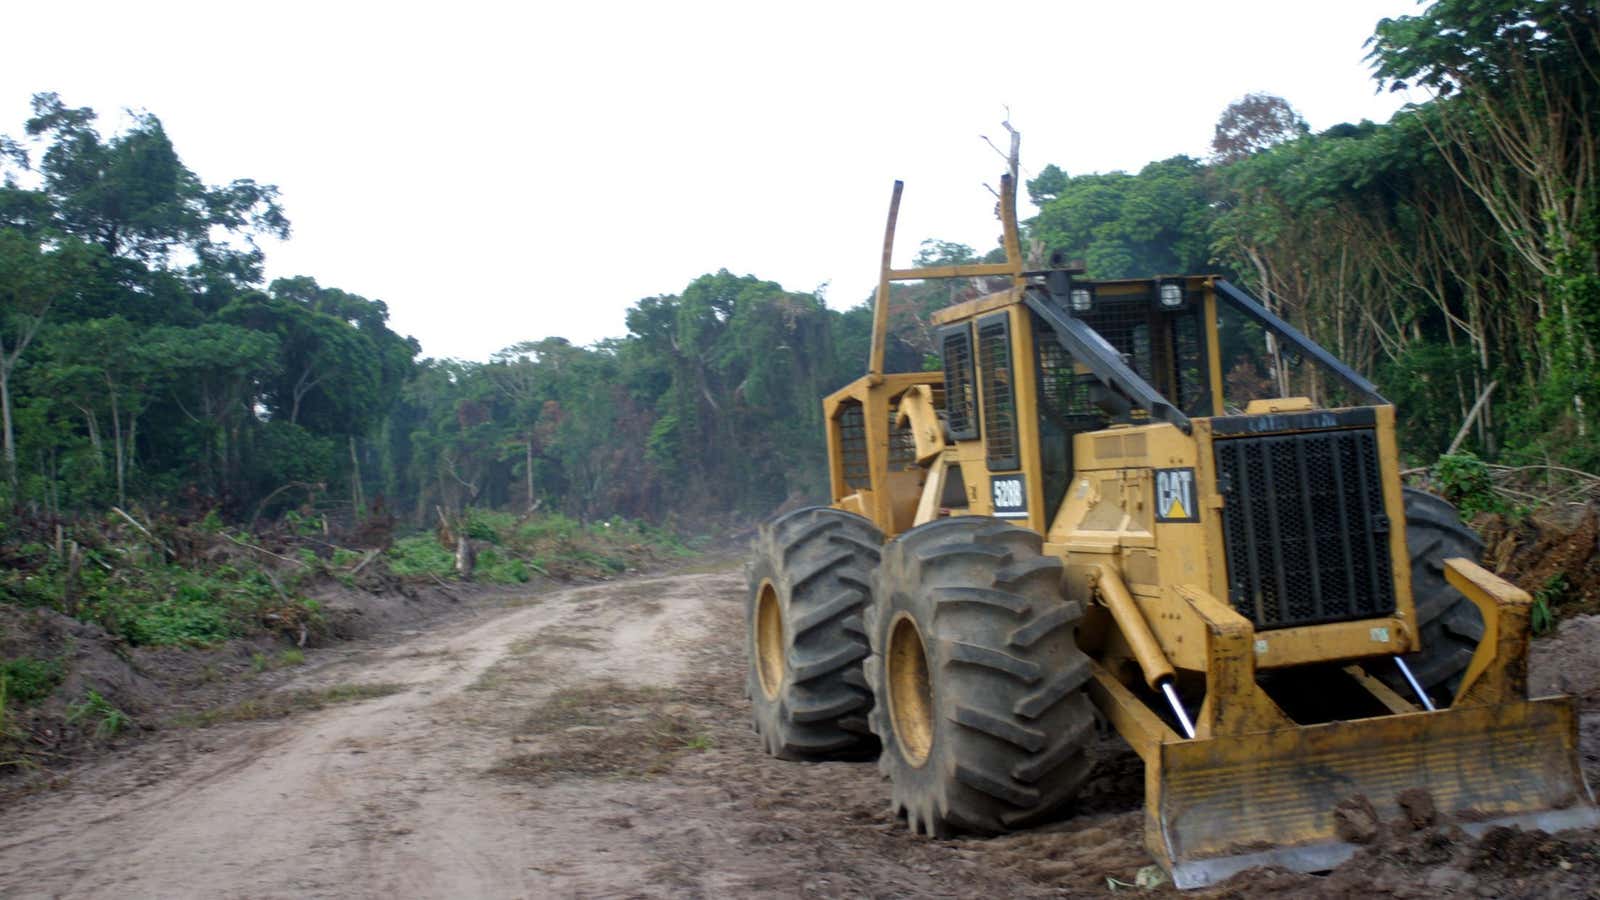 A logging company’s tractor in a DR Congo rainforest